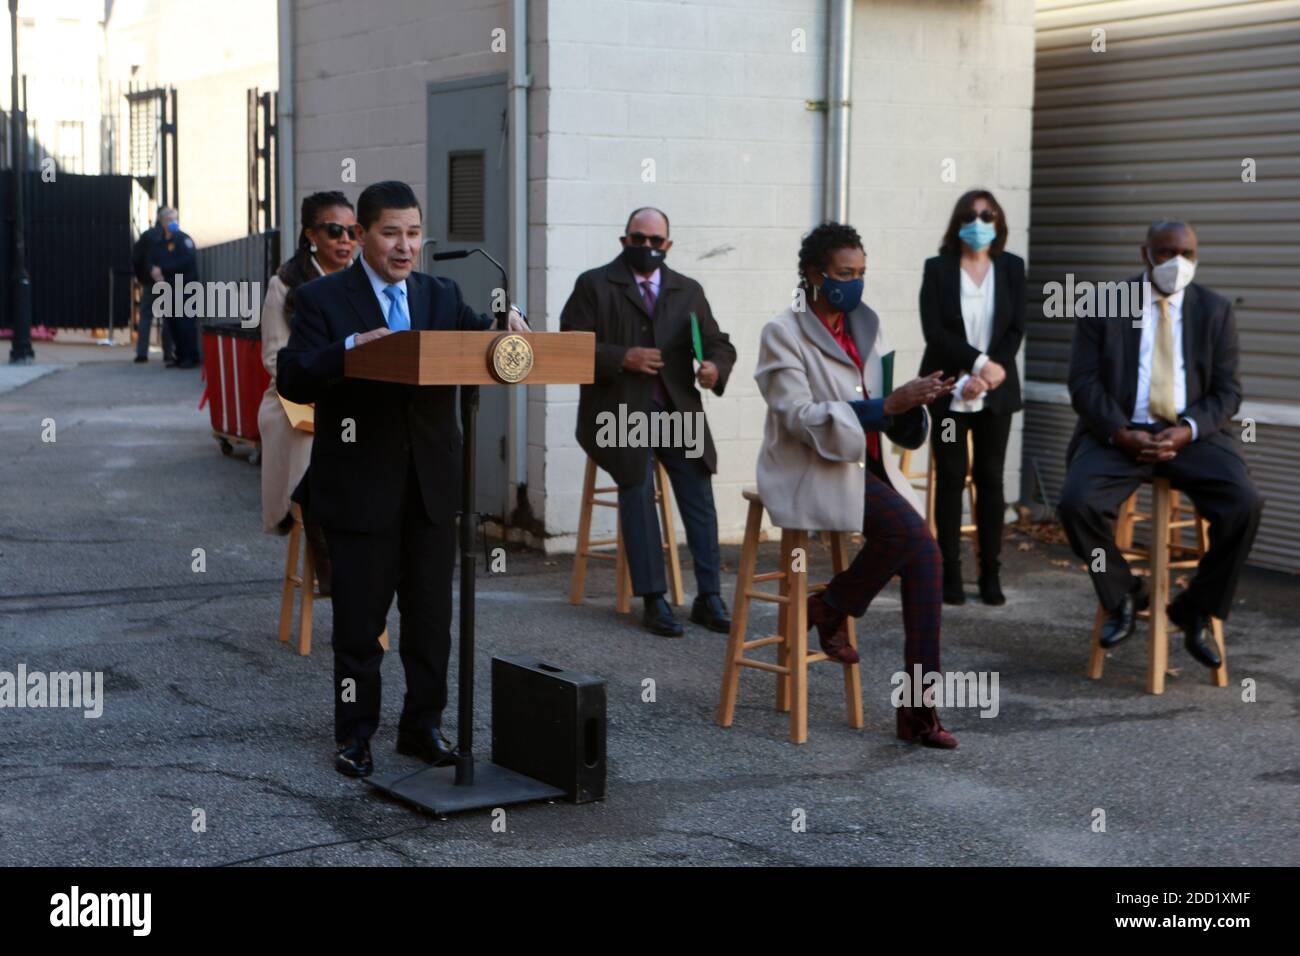 BROOKLYN, NEW YORK: NOVEMBER 23, 2020- New York City School Chancellor Richard Carranza attends the press conference to announce the groundbreaking on the 681-seat school building for the Medgar Evers College Preparatory School in partnership with the Department of Education (DOE), the School Construction Authority (SCA), and CUNY held at Medgar Evers College Preparatory School on November 23, 2020 in Brooklyn, New York City. Photo Credit: mpi43/MediaPunch Stock Photo